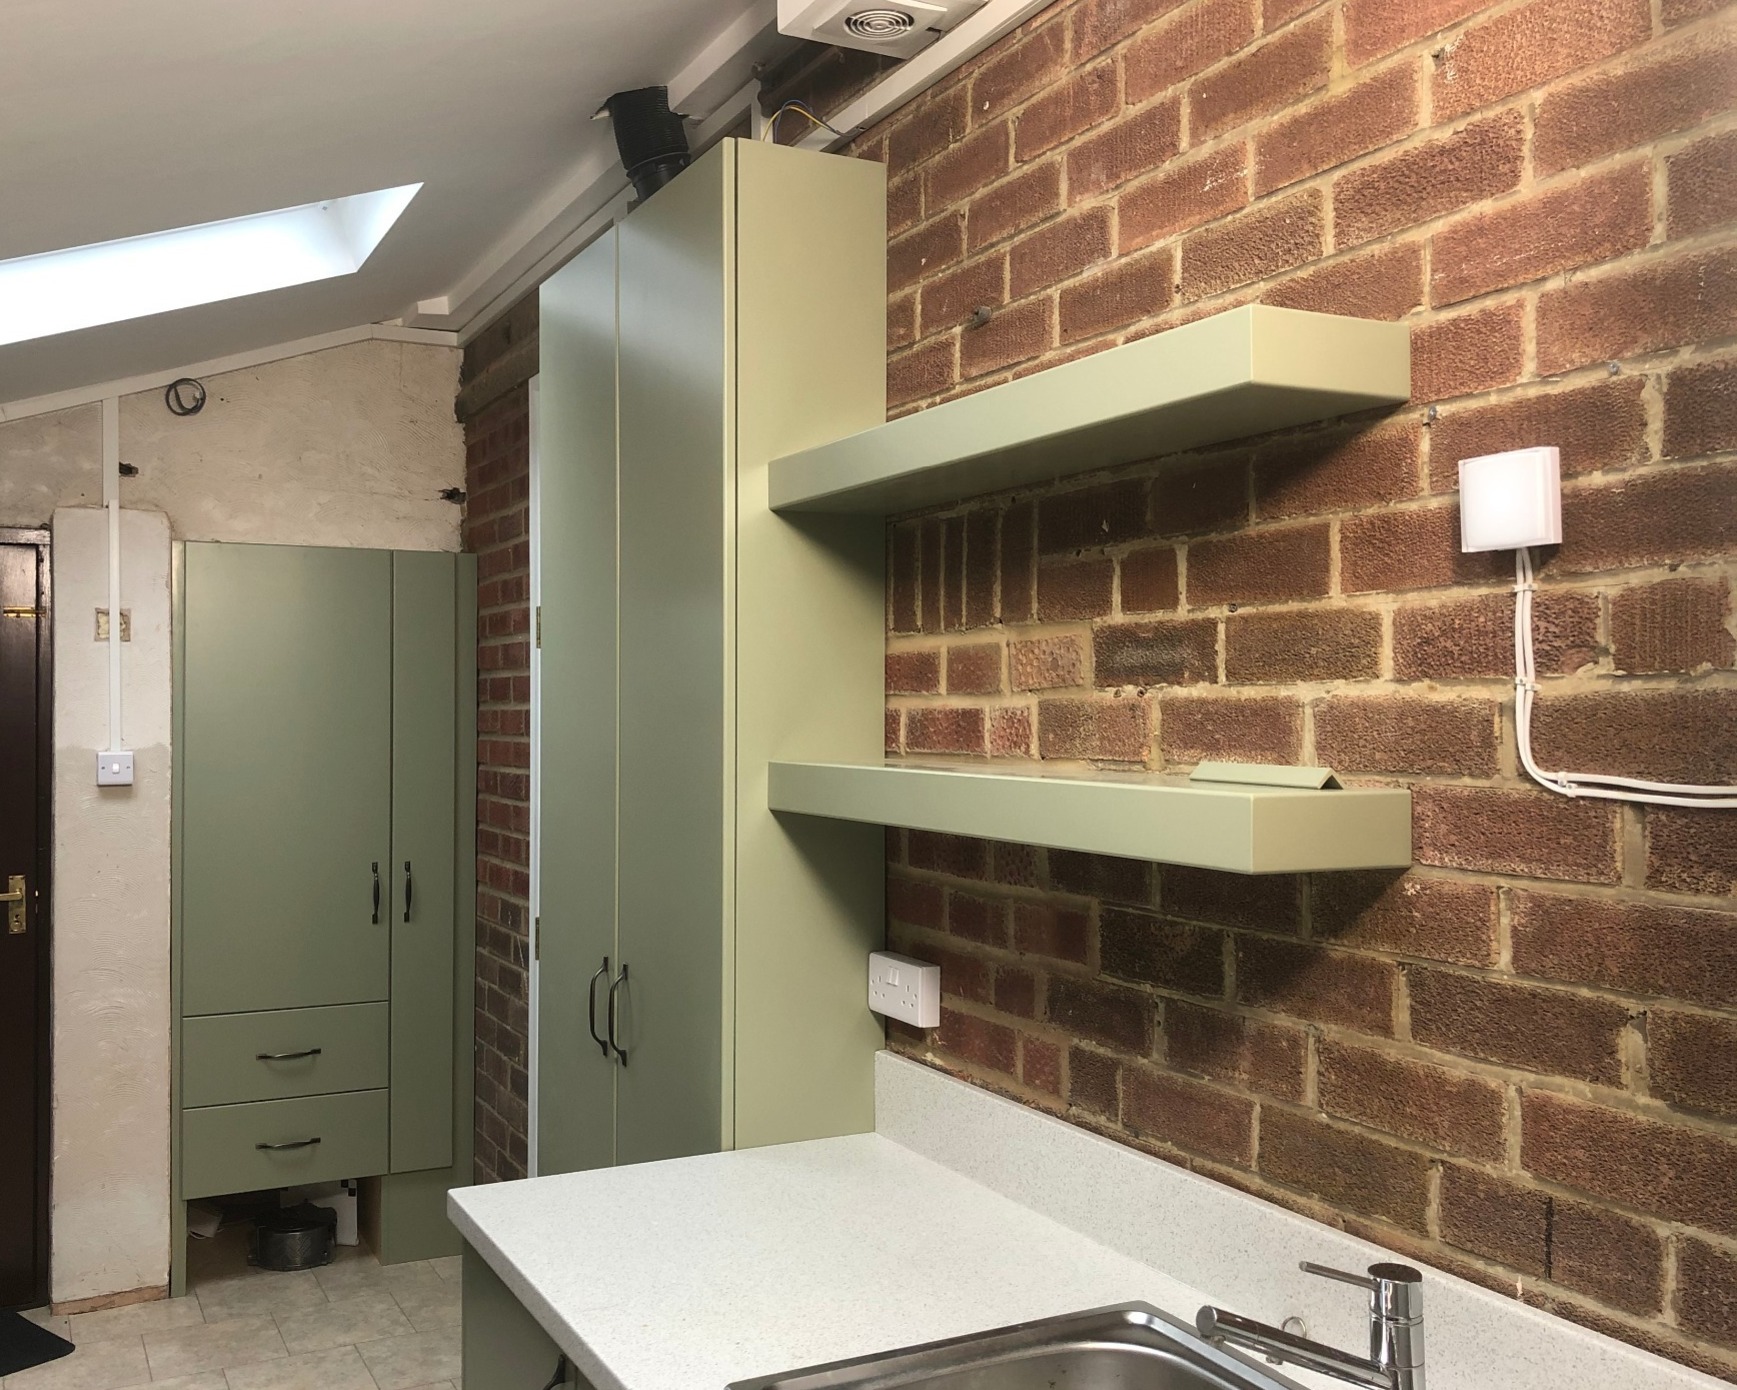 Utility room in garage, Oxfordshire